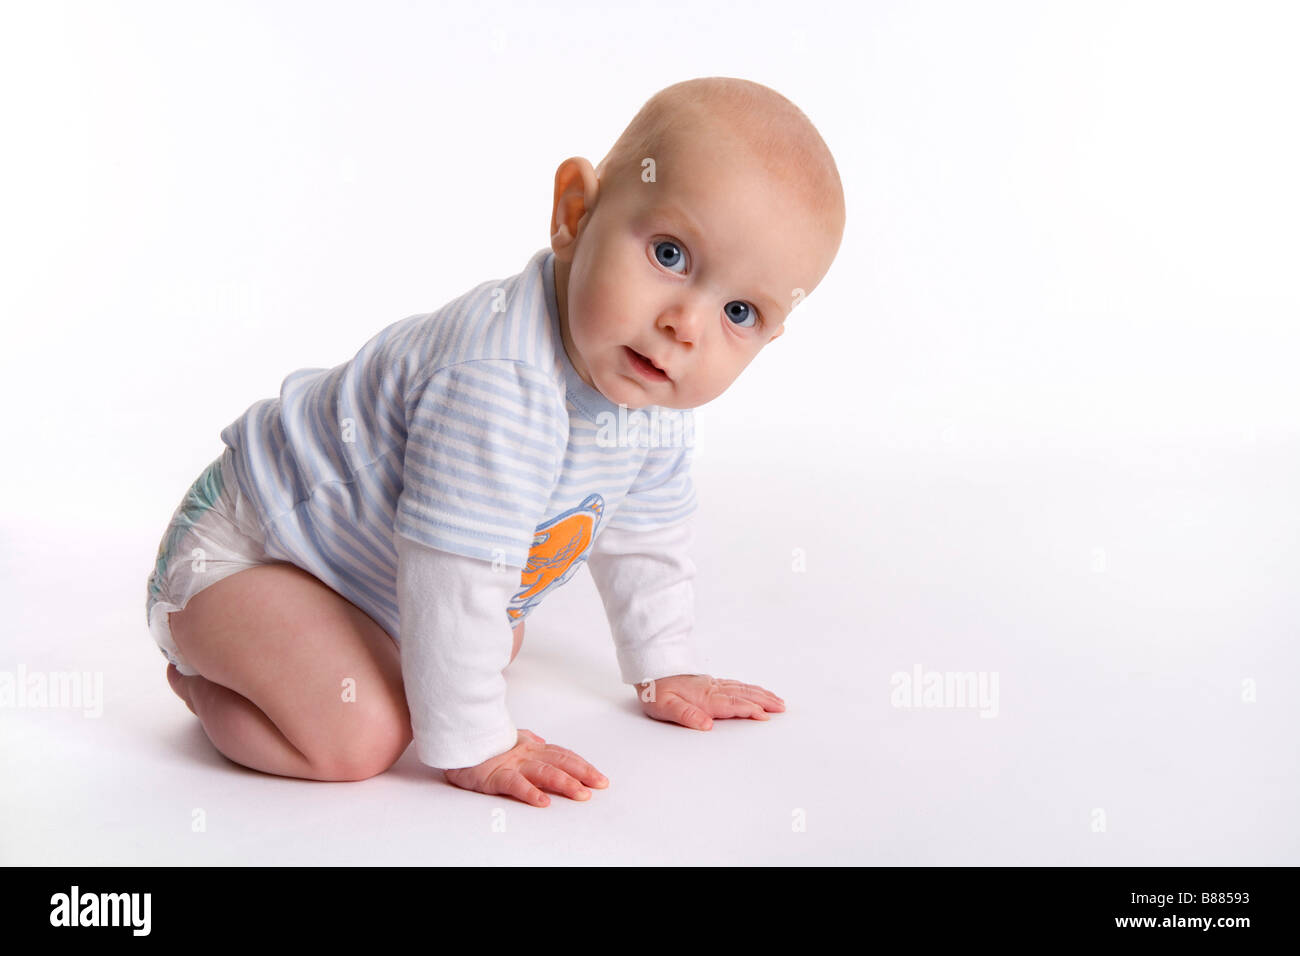 Portrait of a baby boy starting to crawl Stock Photo